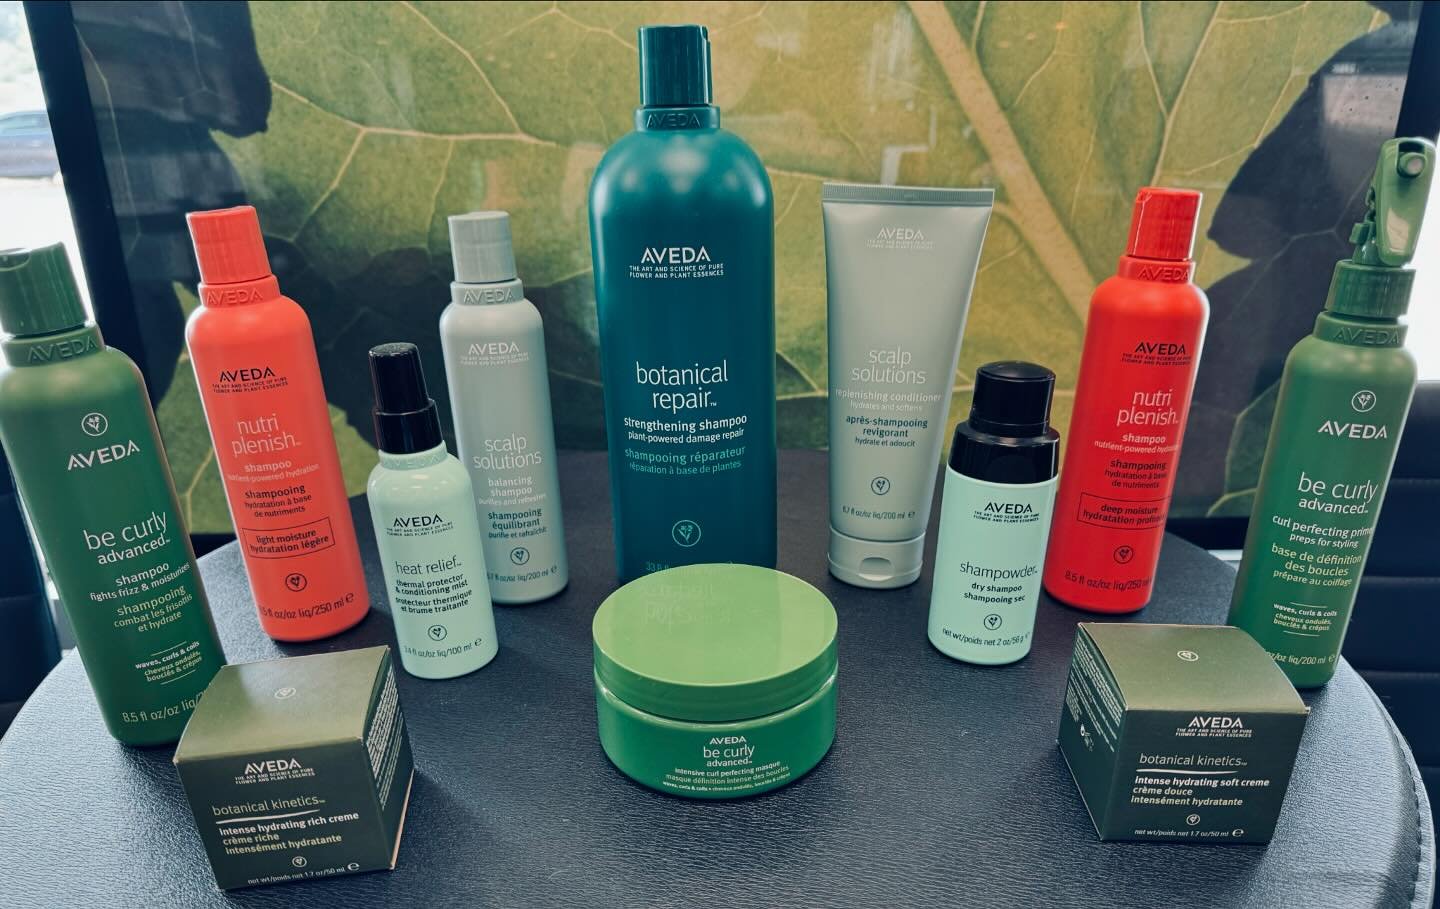 Hurry! 25% off all your favorite products ends in 5 days. Don&rsquo;t miss out! #aveda